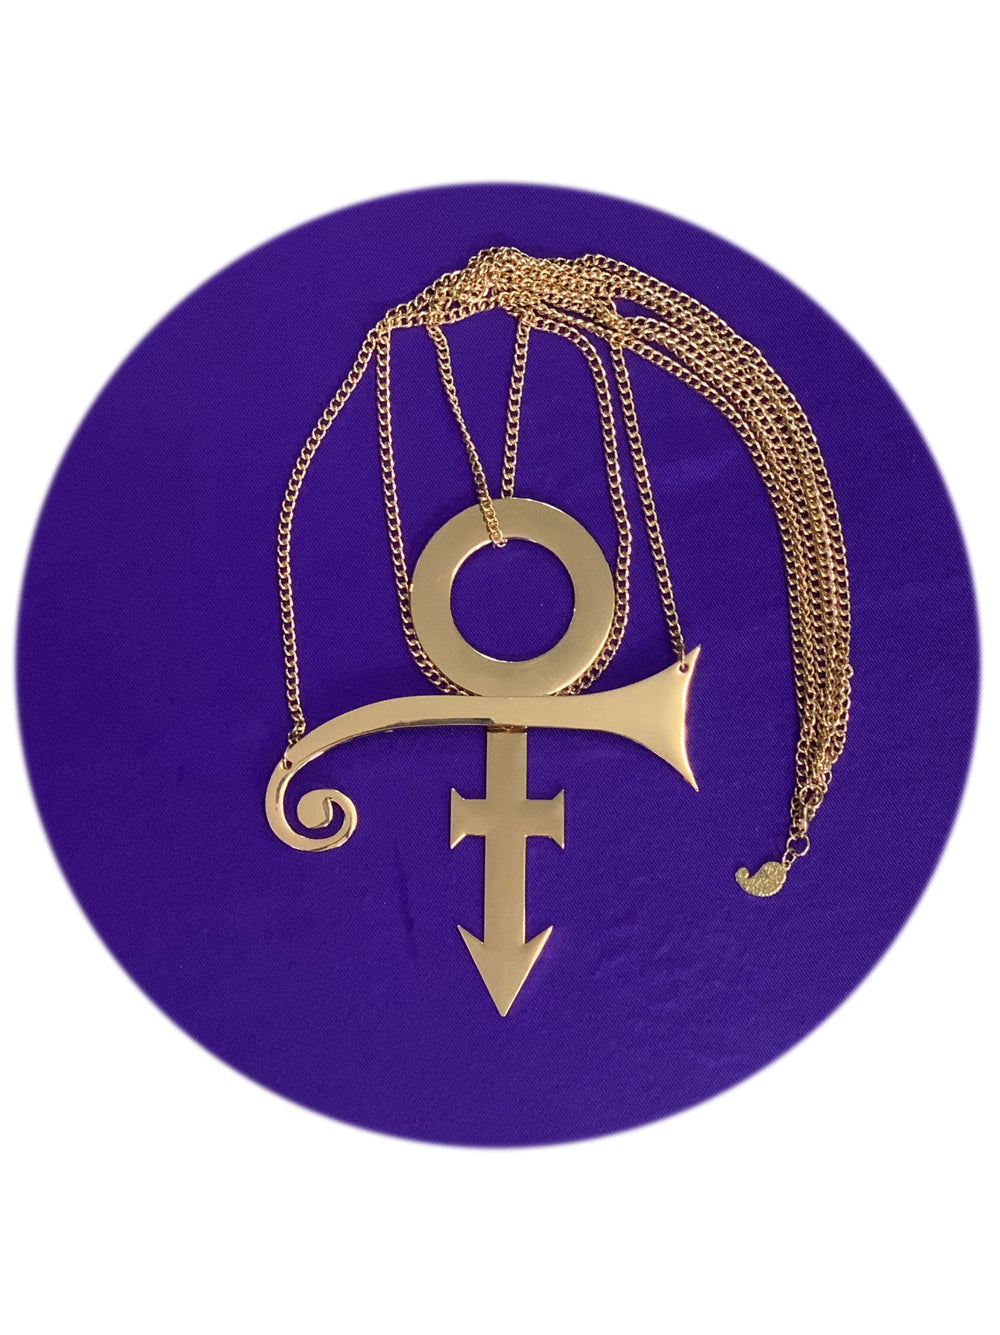 Prince Official Paisley Park Original 3 Chains O' Gold Replica Necklace Boxed